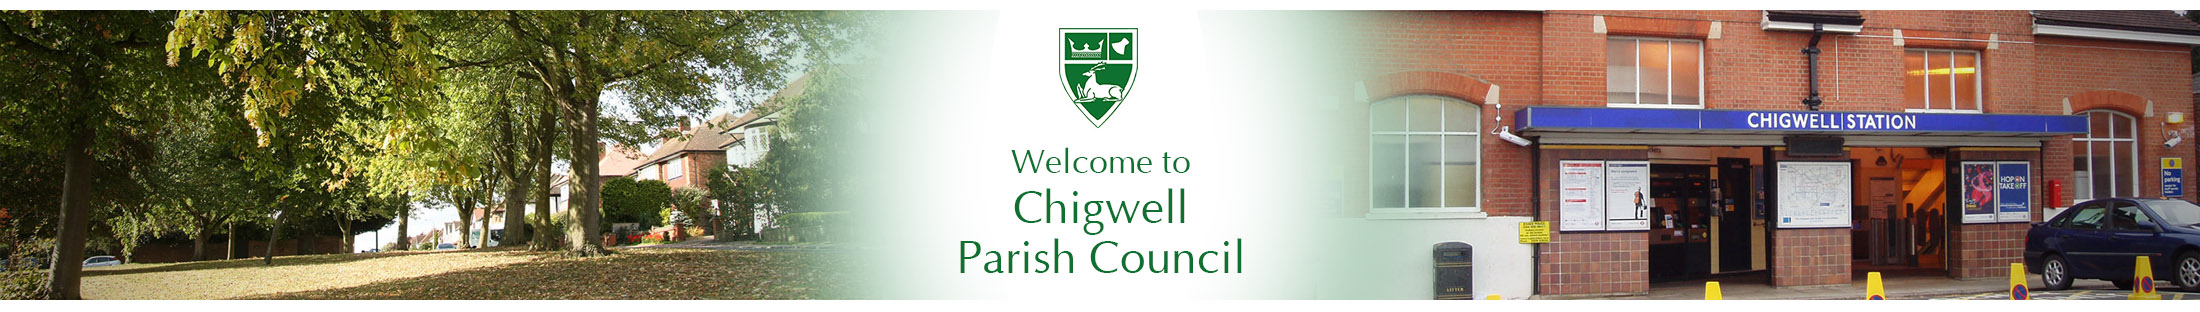 Header Image for Chigwell Parish Council